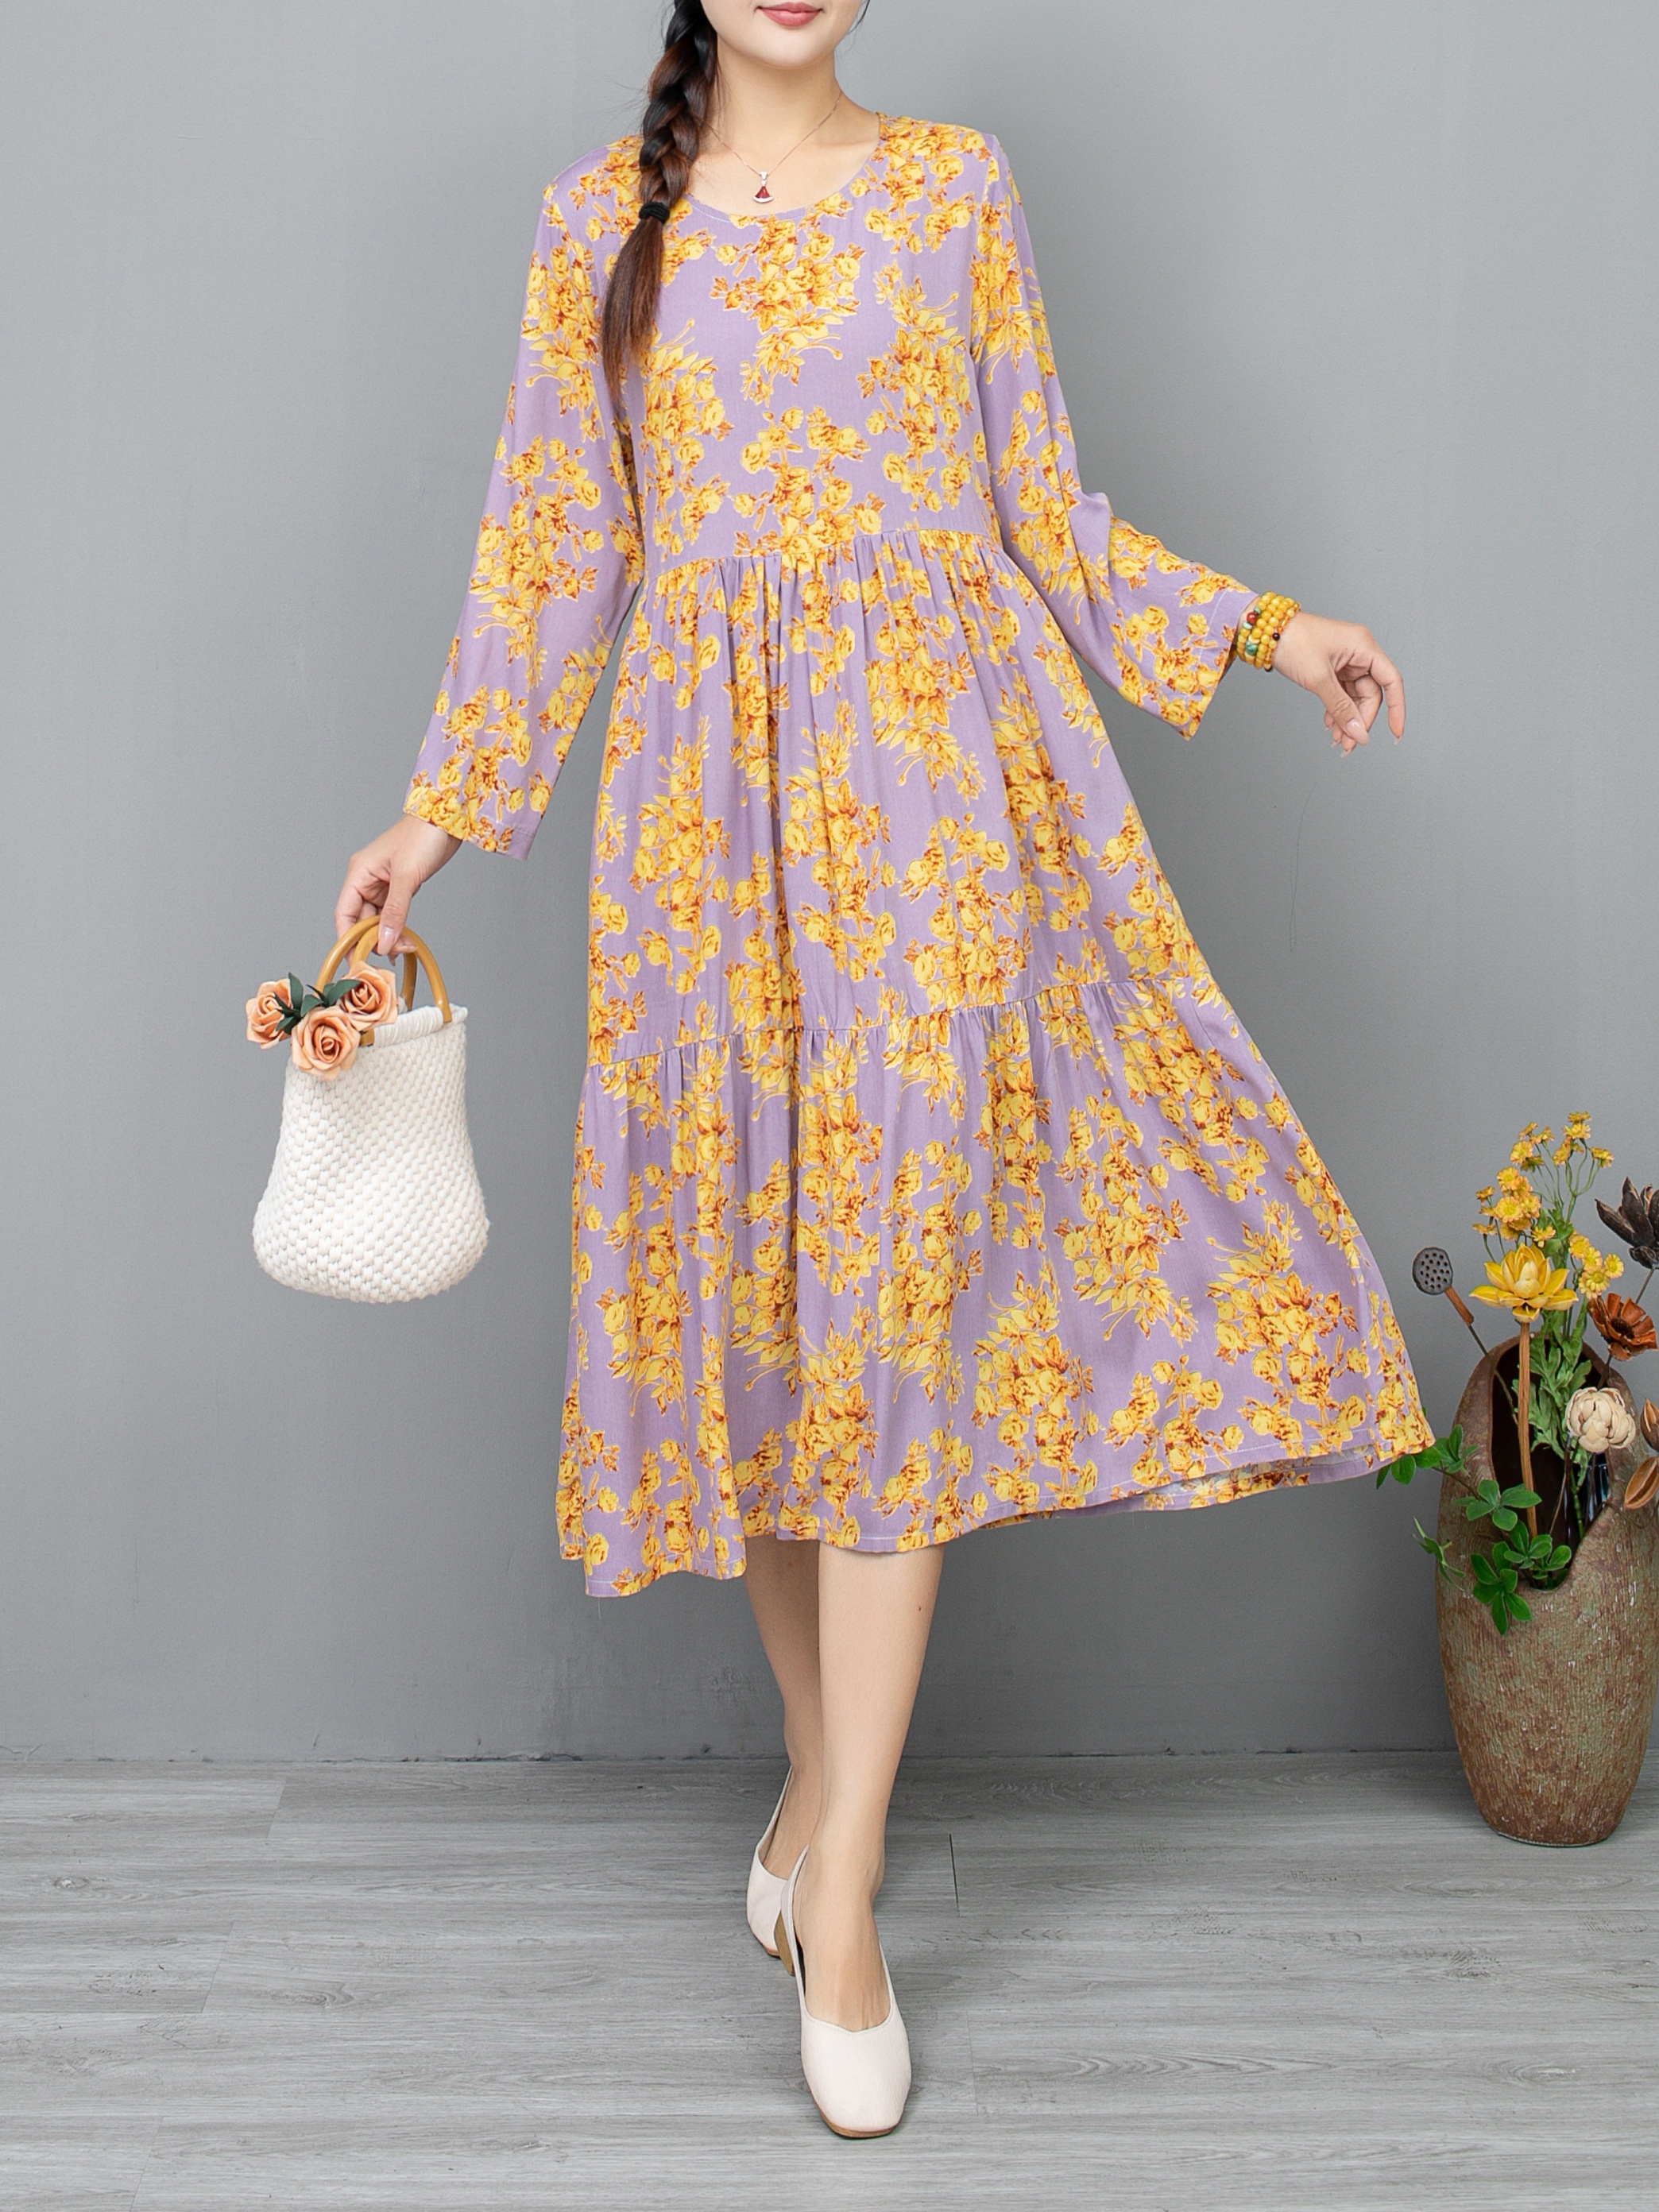 floral print crew neck dress elegant long sleeve a line dress for spring fall womens clothing